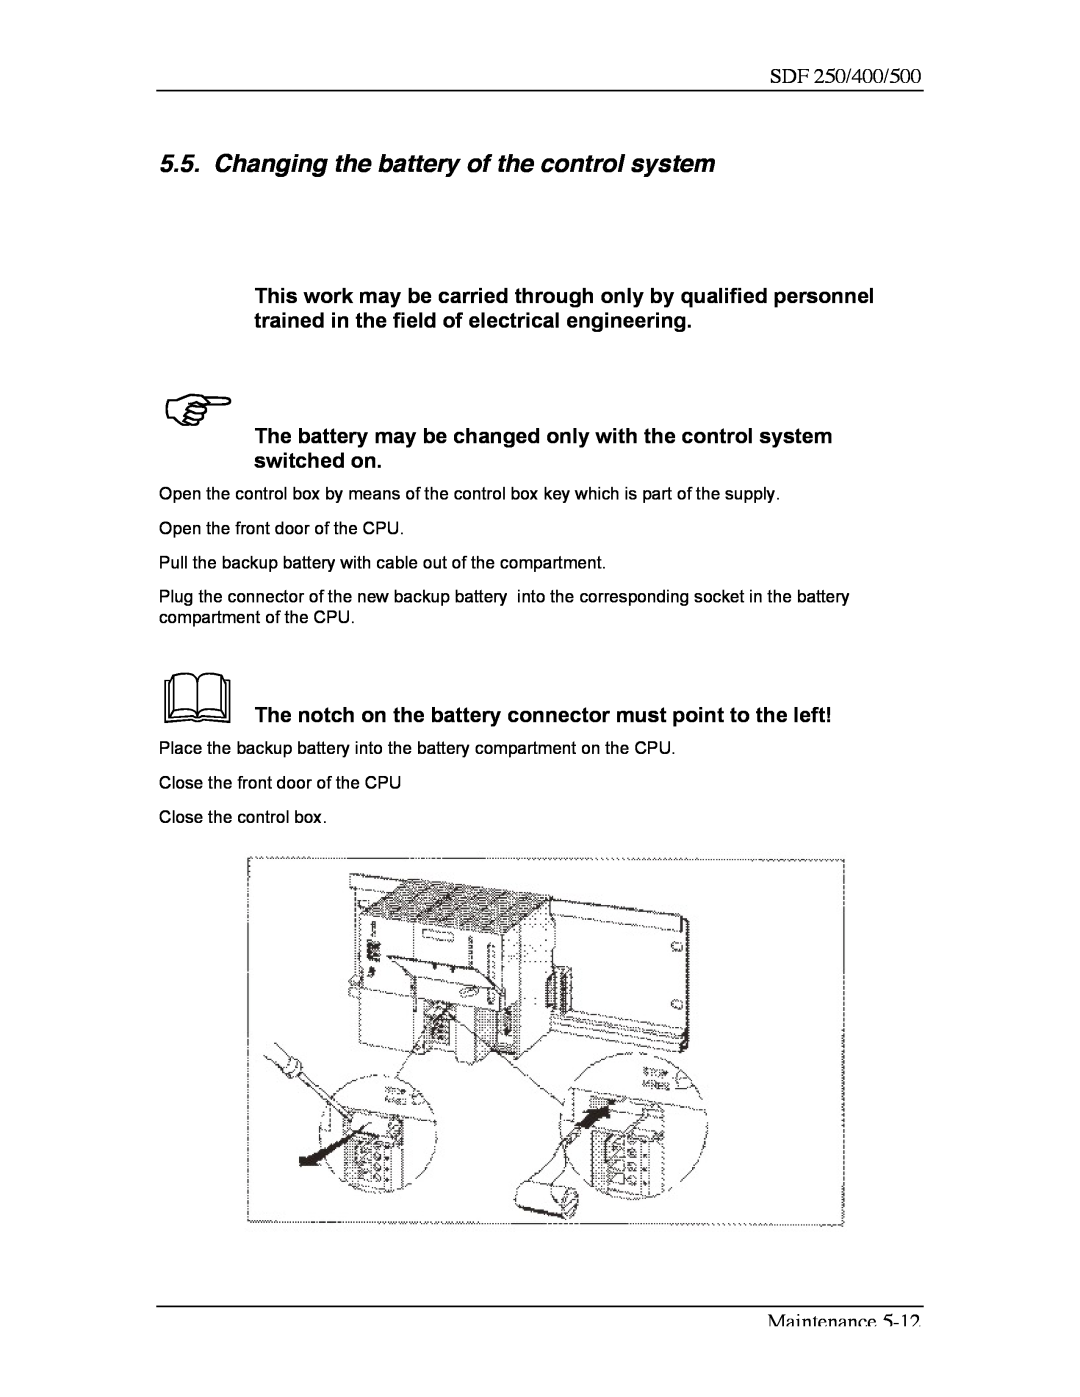 Sterling SDF 250, SDF 400, SDF 500 manual Changing the battery of the control system 